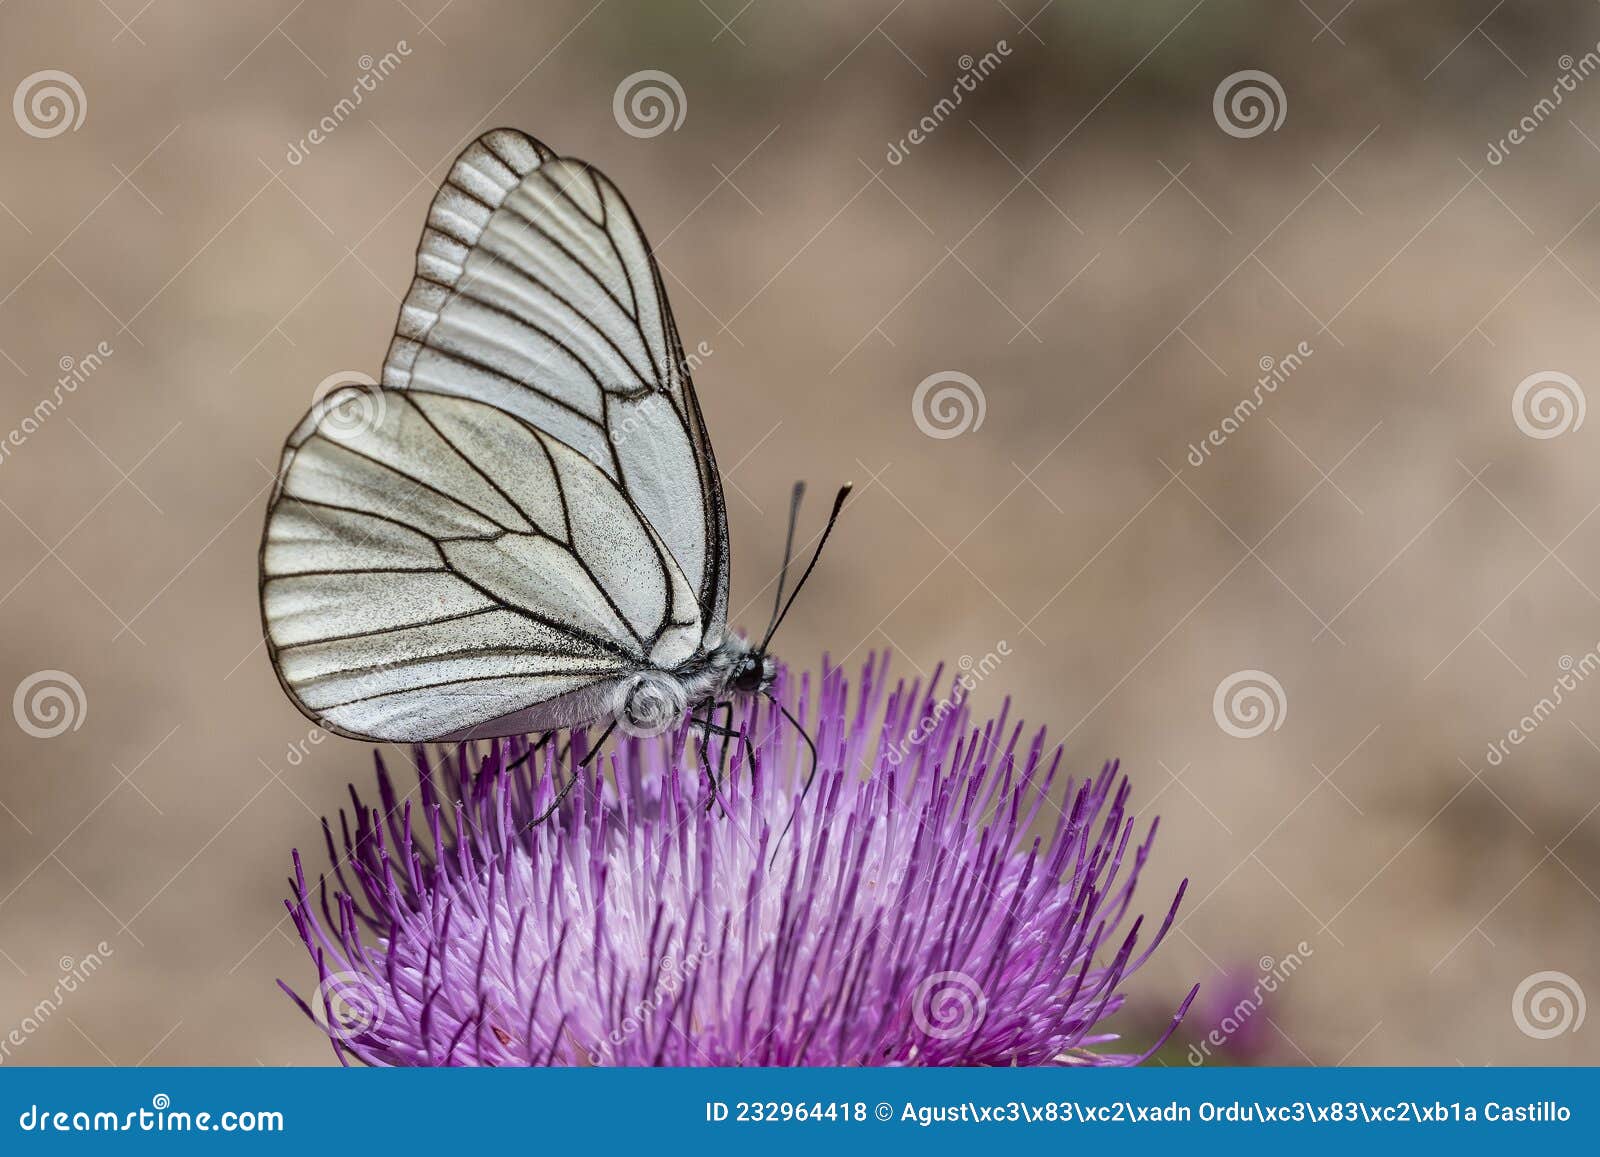 day butterfly perched on flower, aporia crataegi.